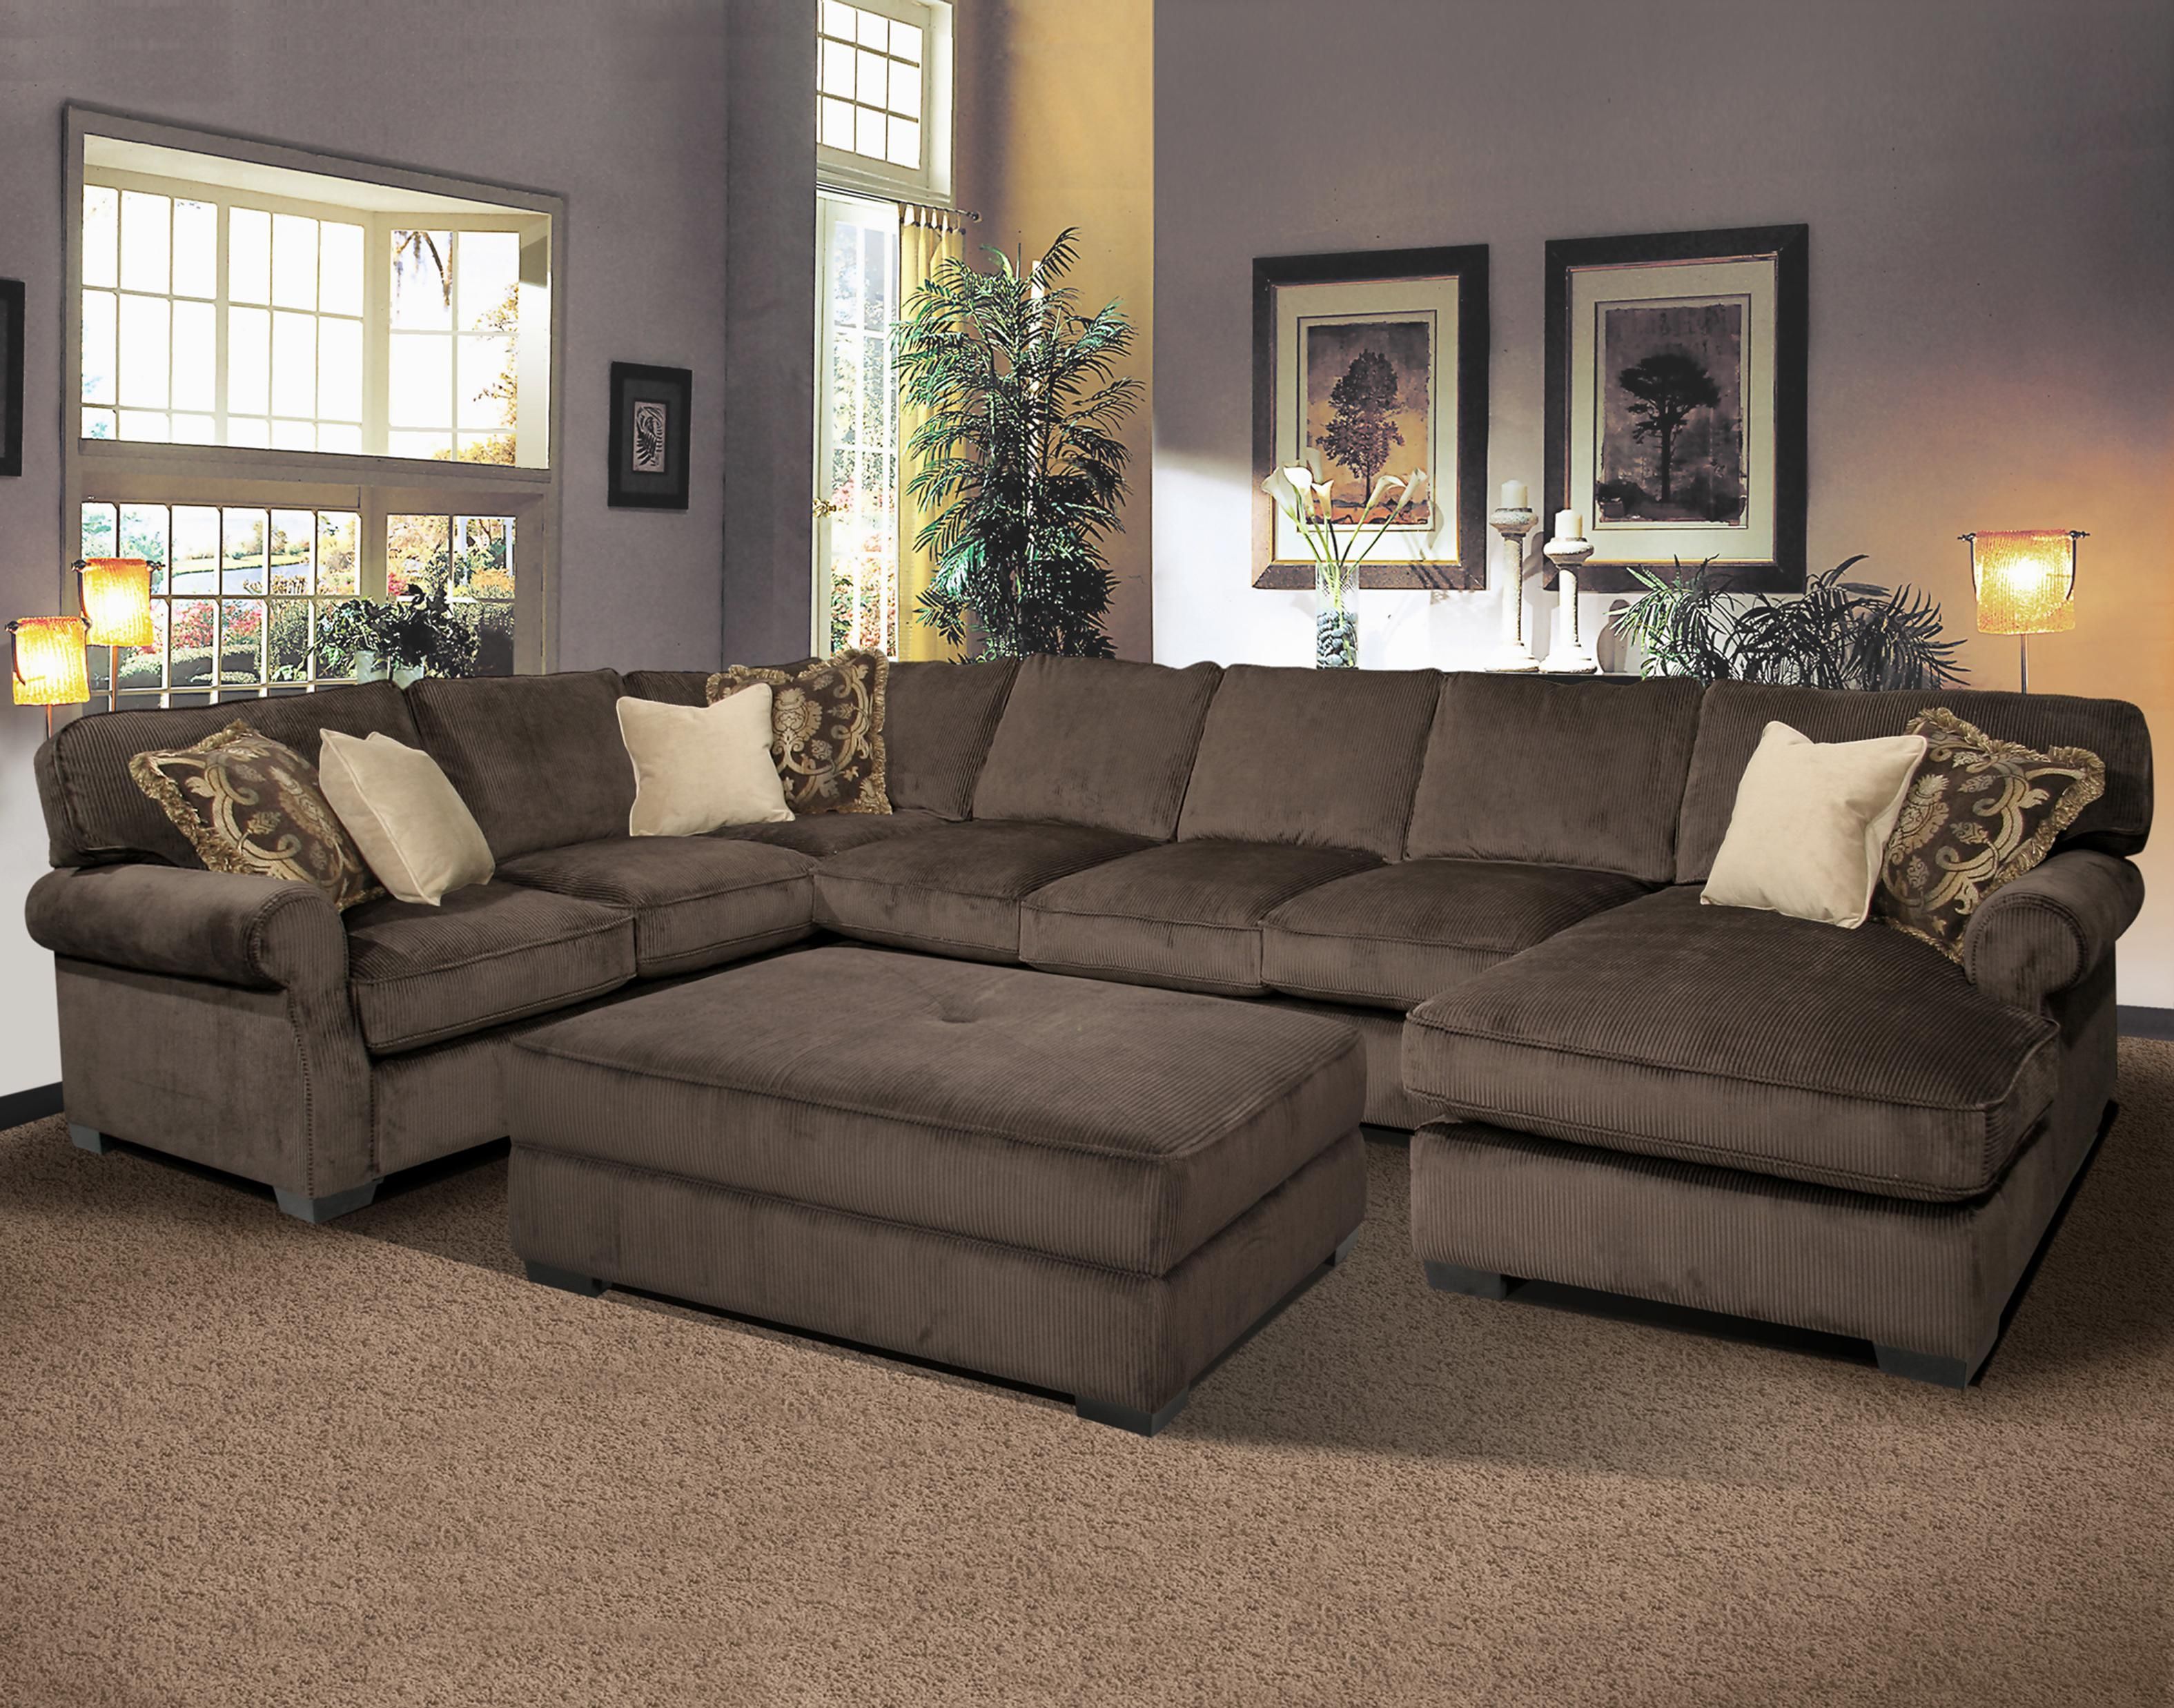 25 Best Ideas About Comfy Sectional On Pinterest With Regard To Comfortable Sectional Sofa (View 3 of 12)